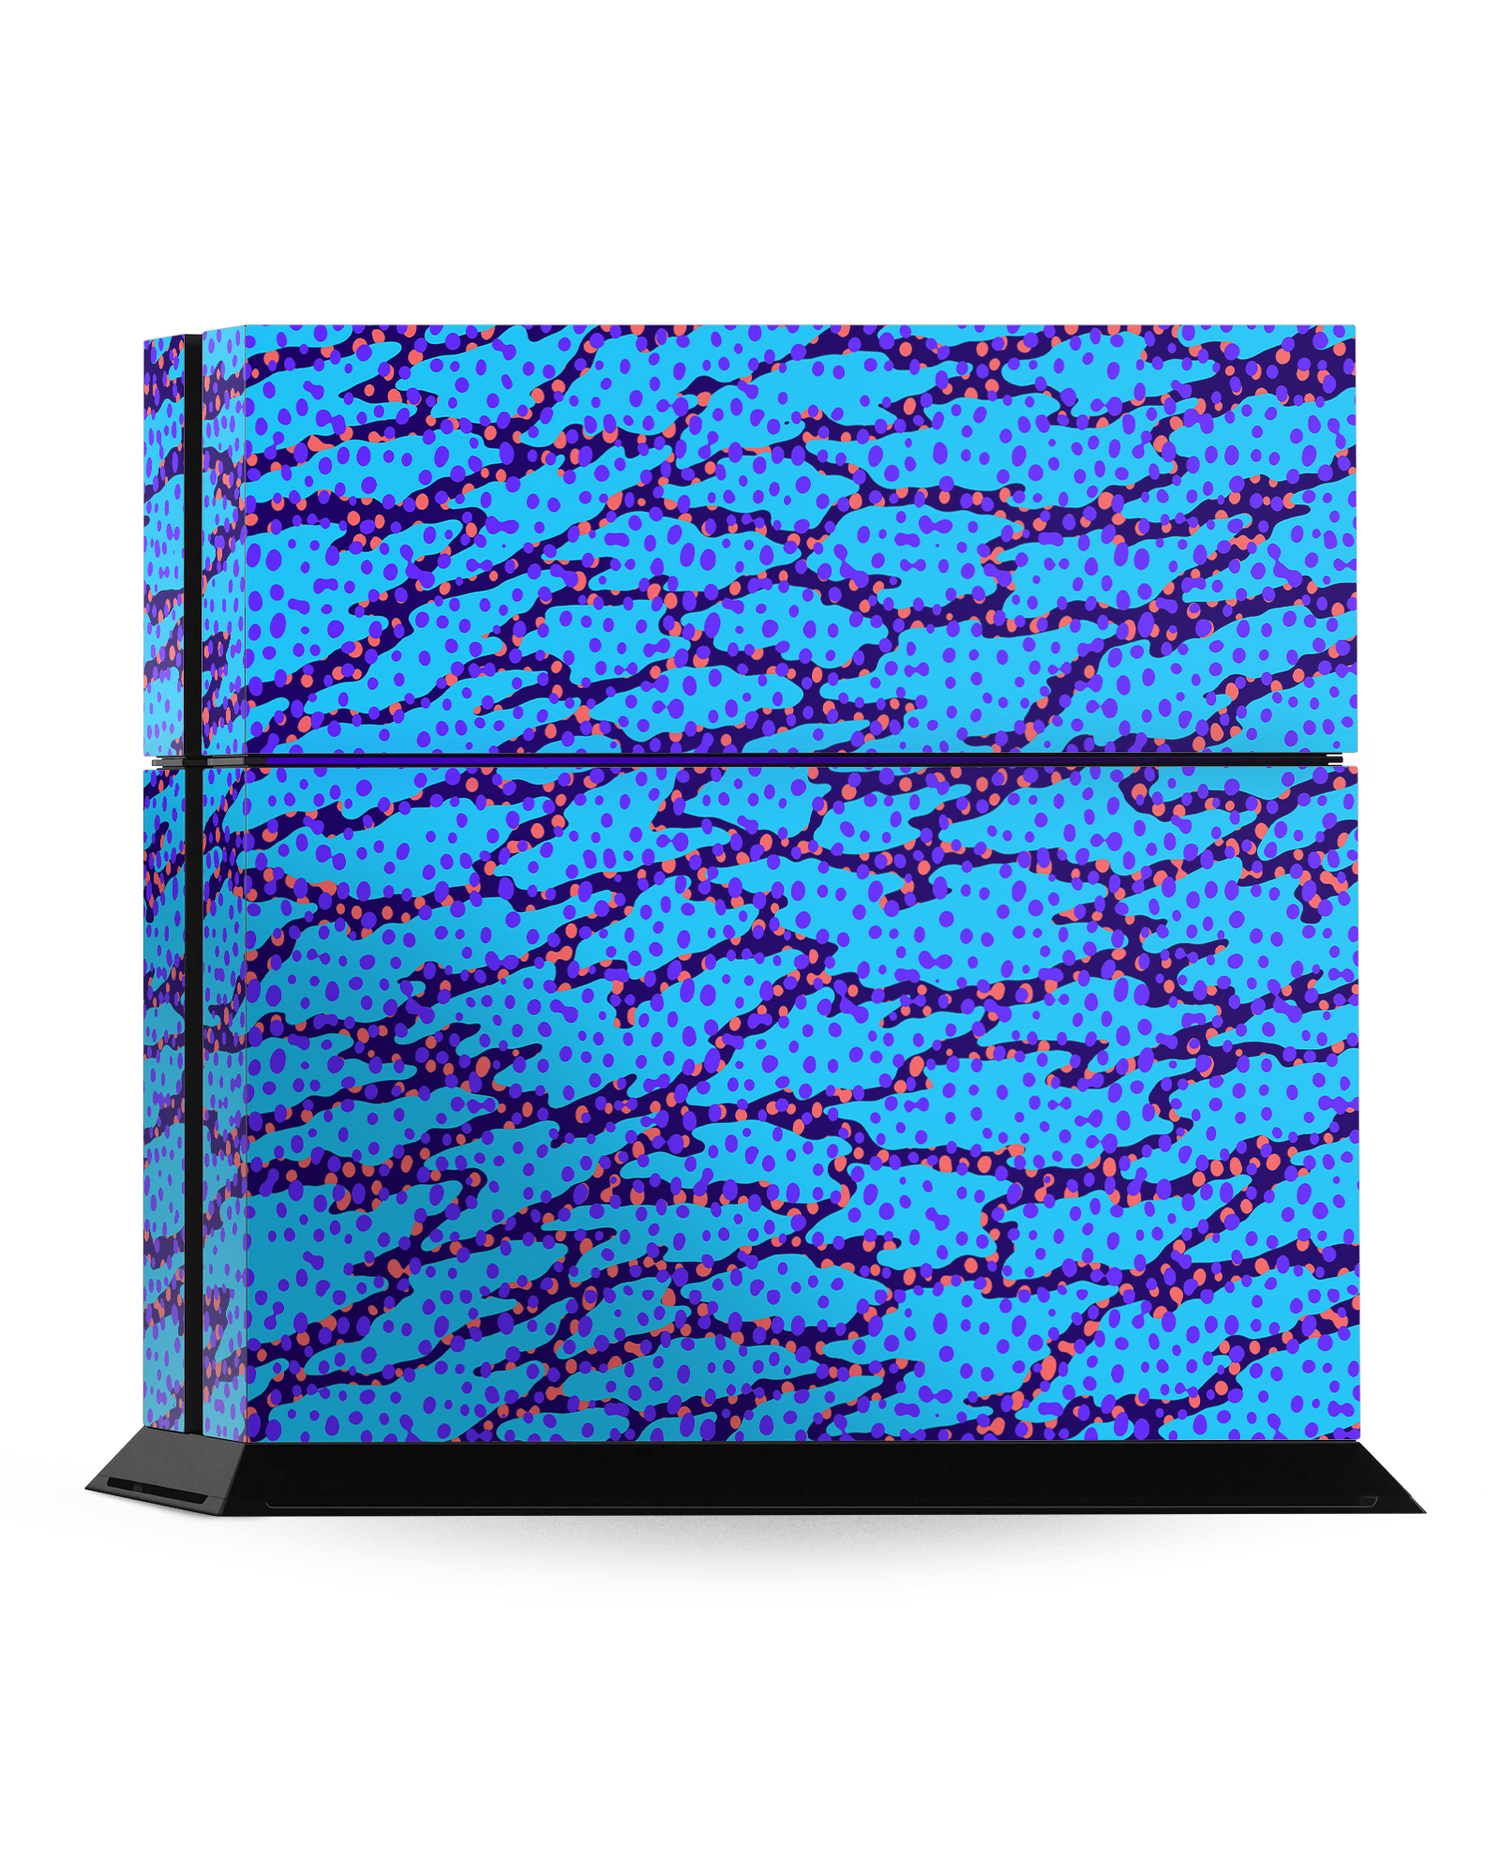 Electric Ocean Console Skin for Sony PlayStation 4: Standing